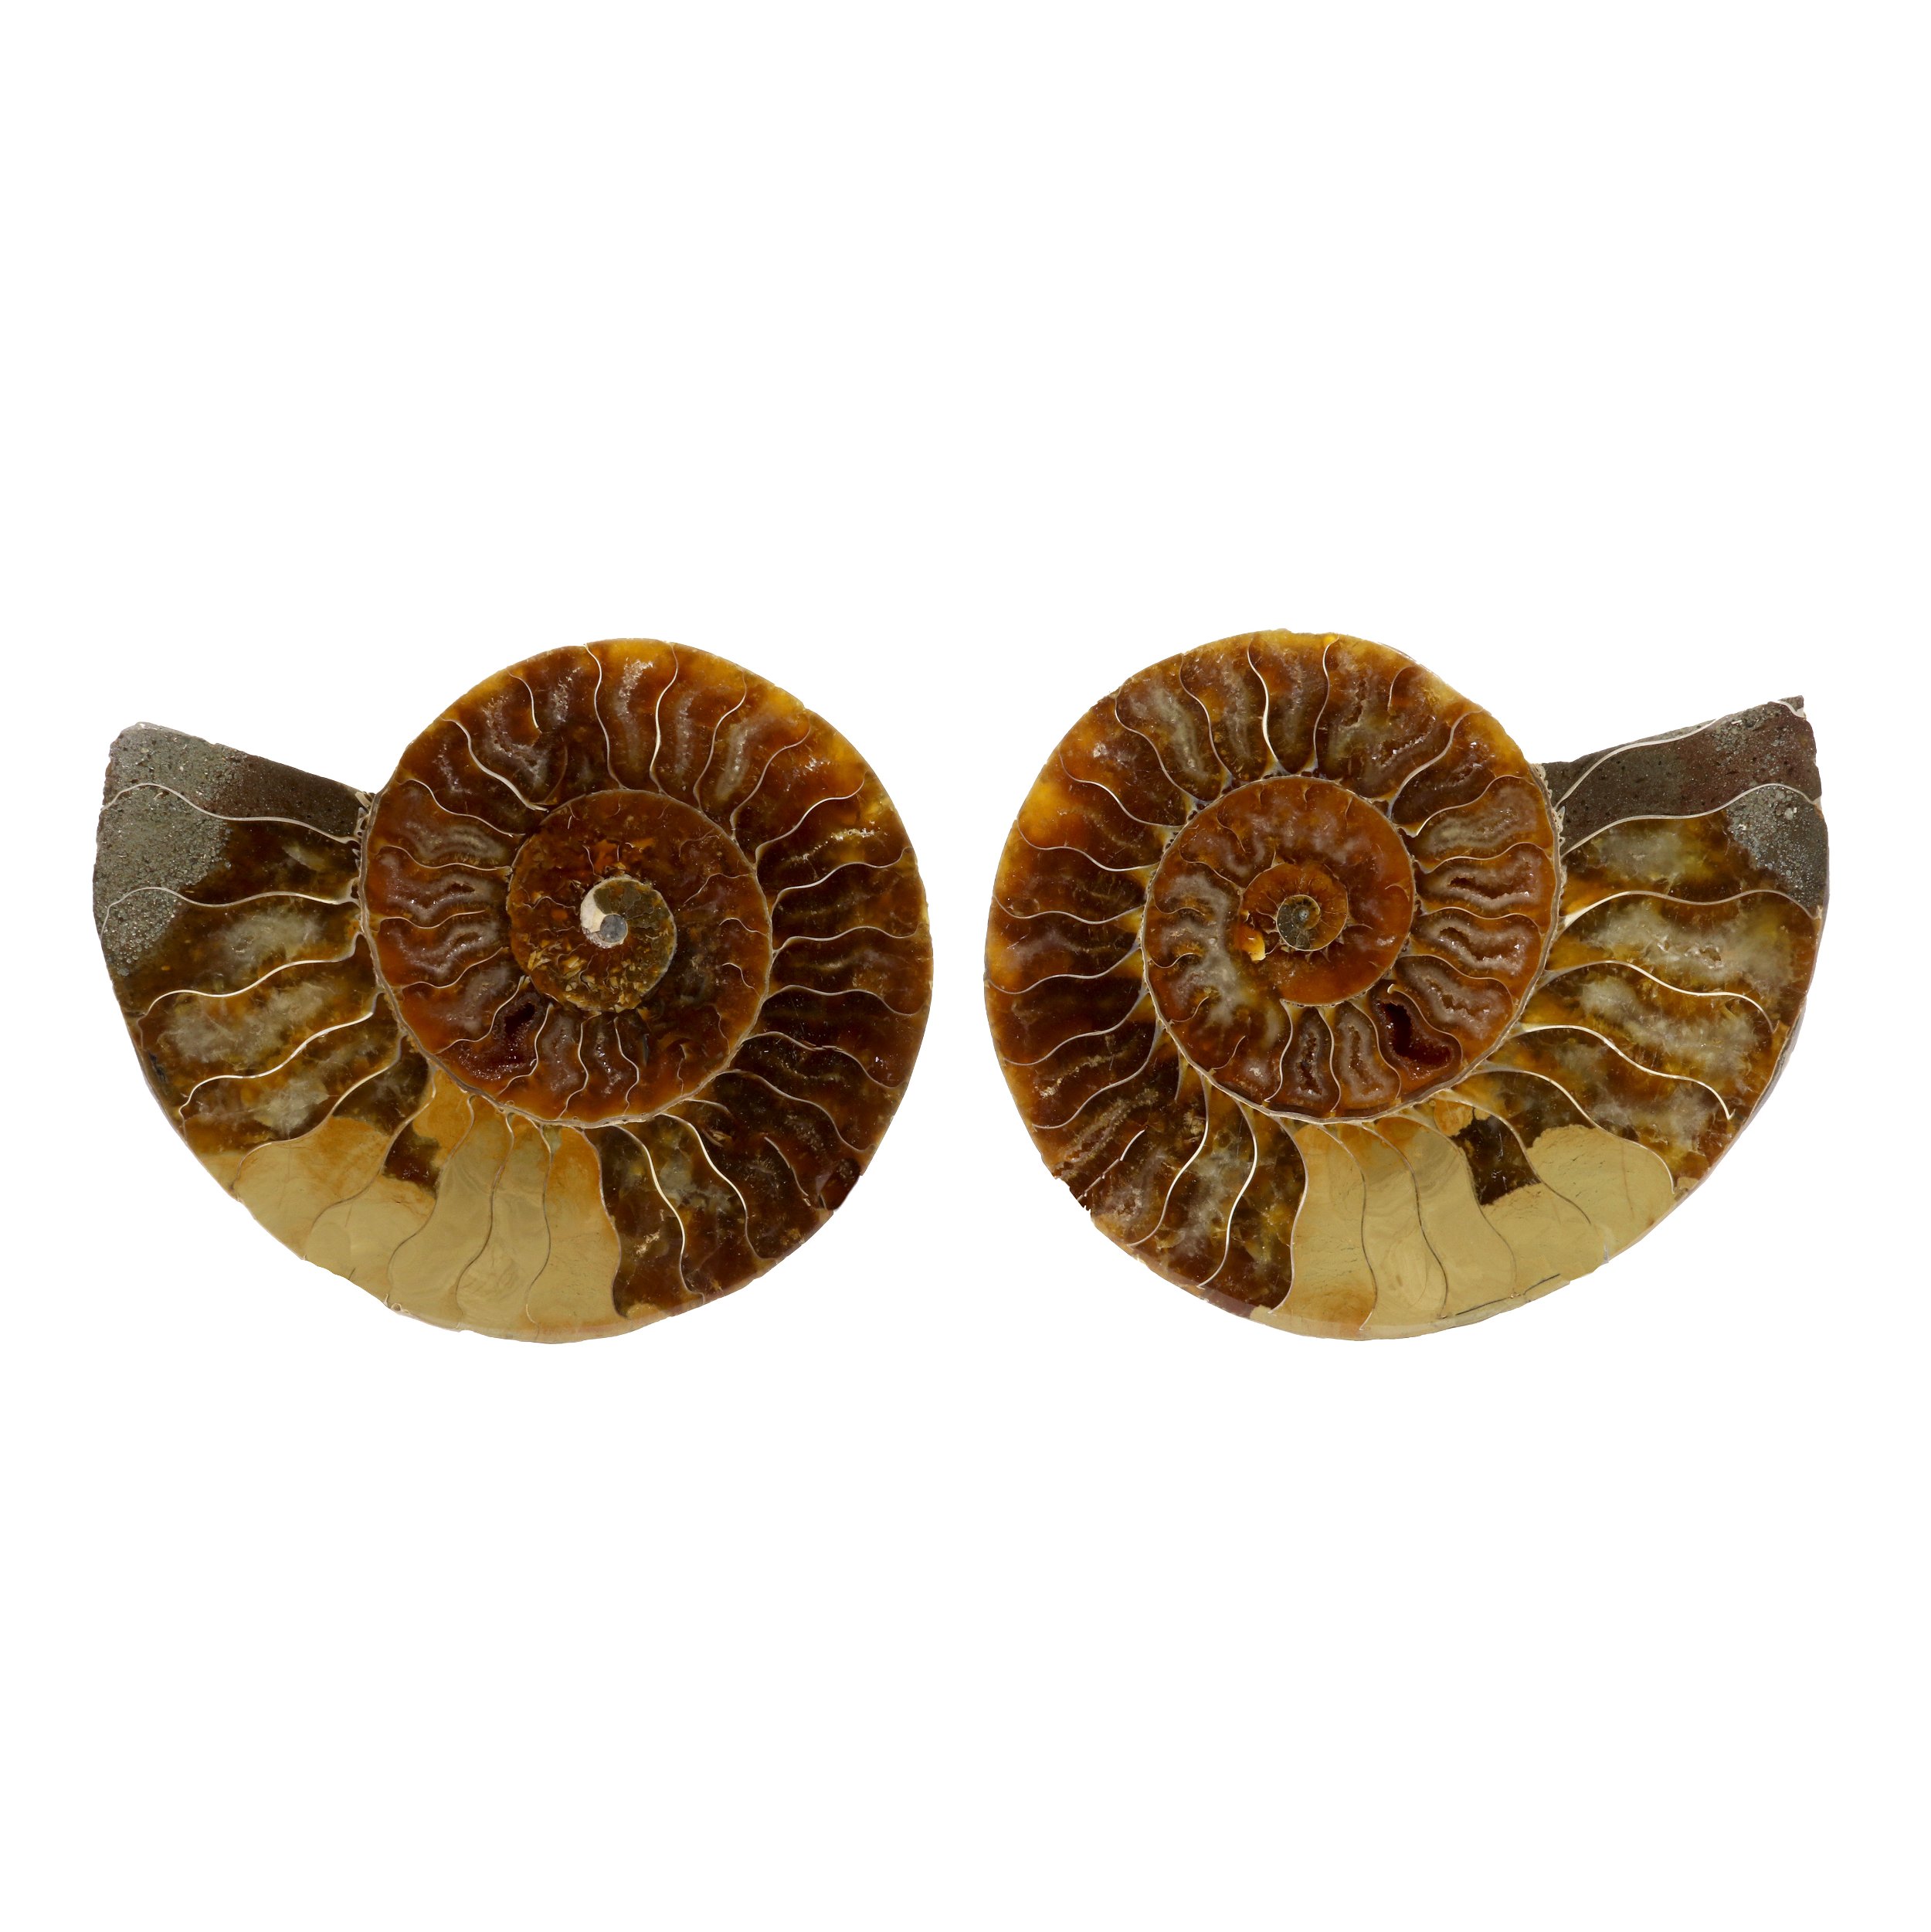 Ammonite Fossil Pair In Acrylic Stands - Beige Seabed Opalescent Back